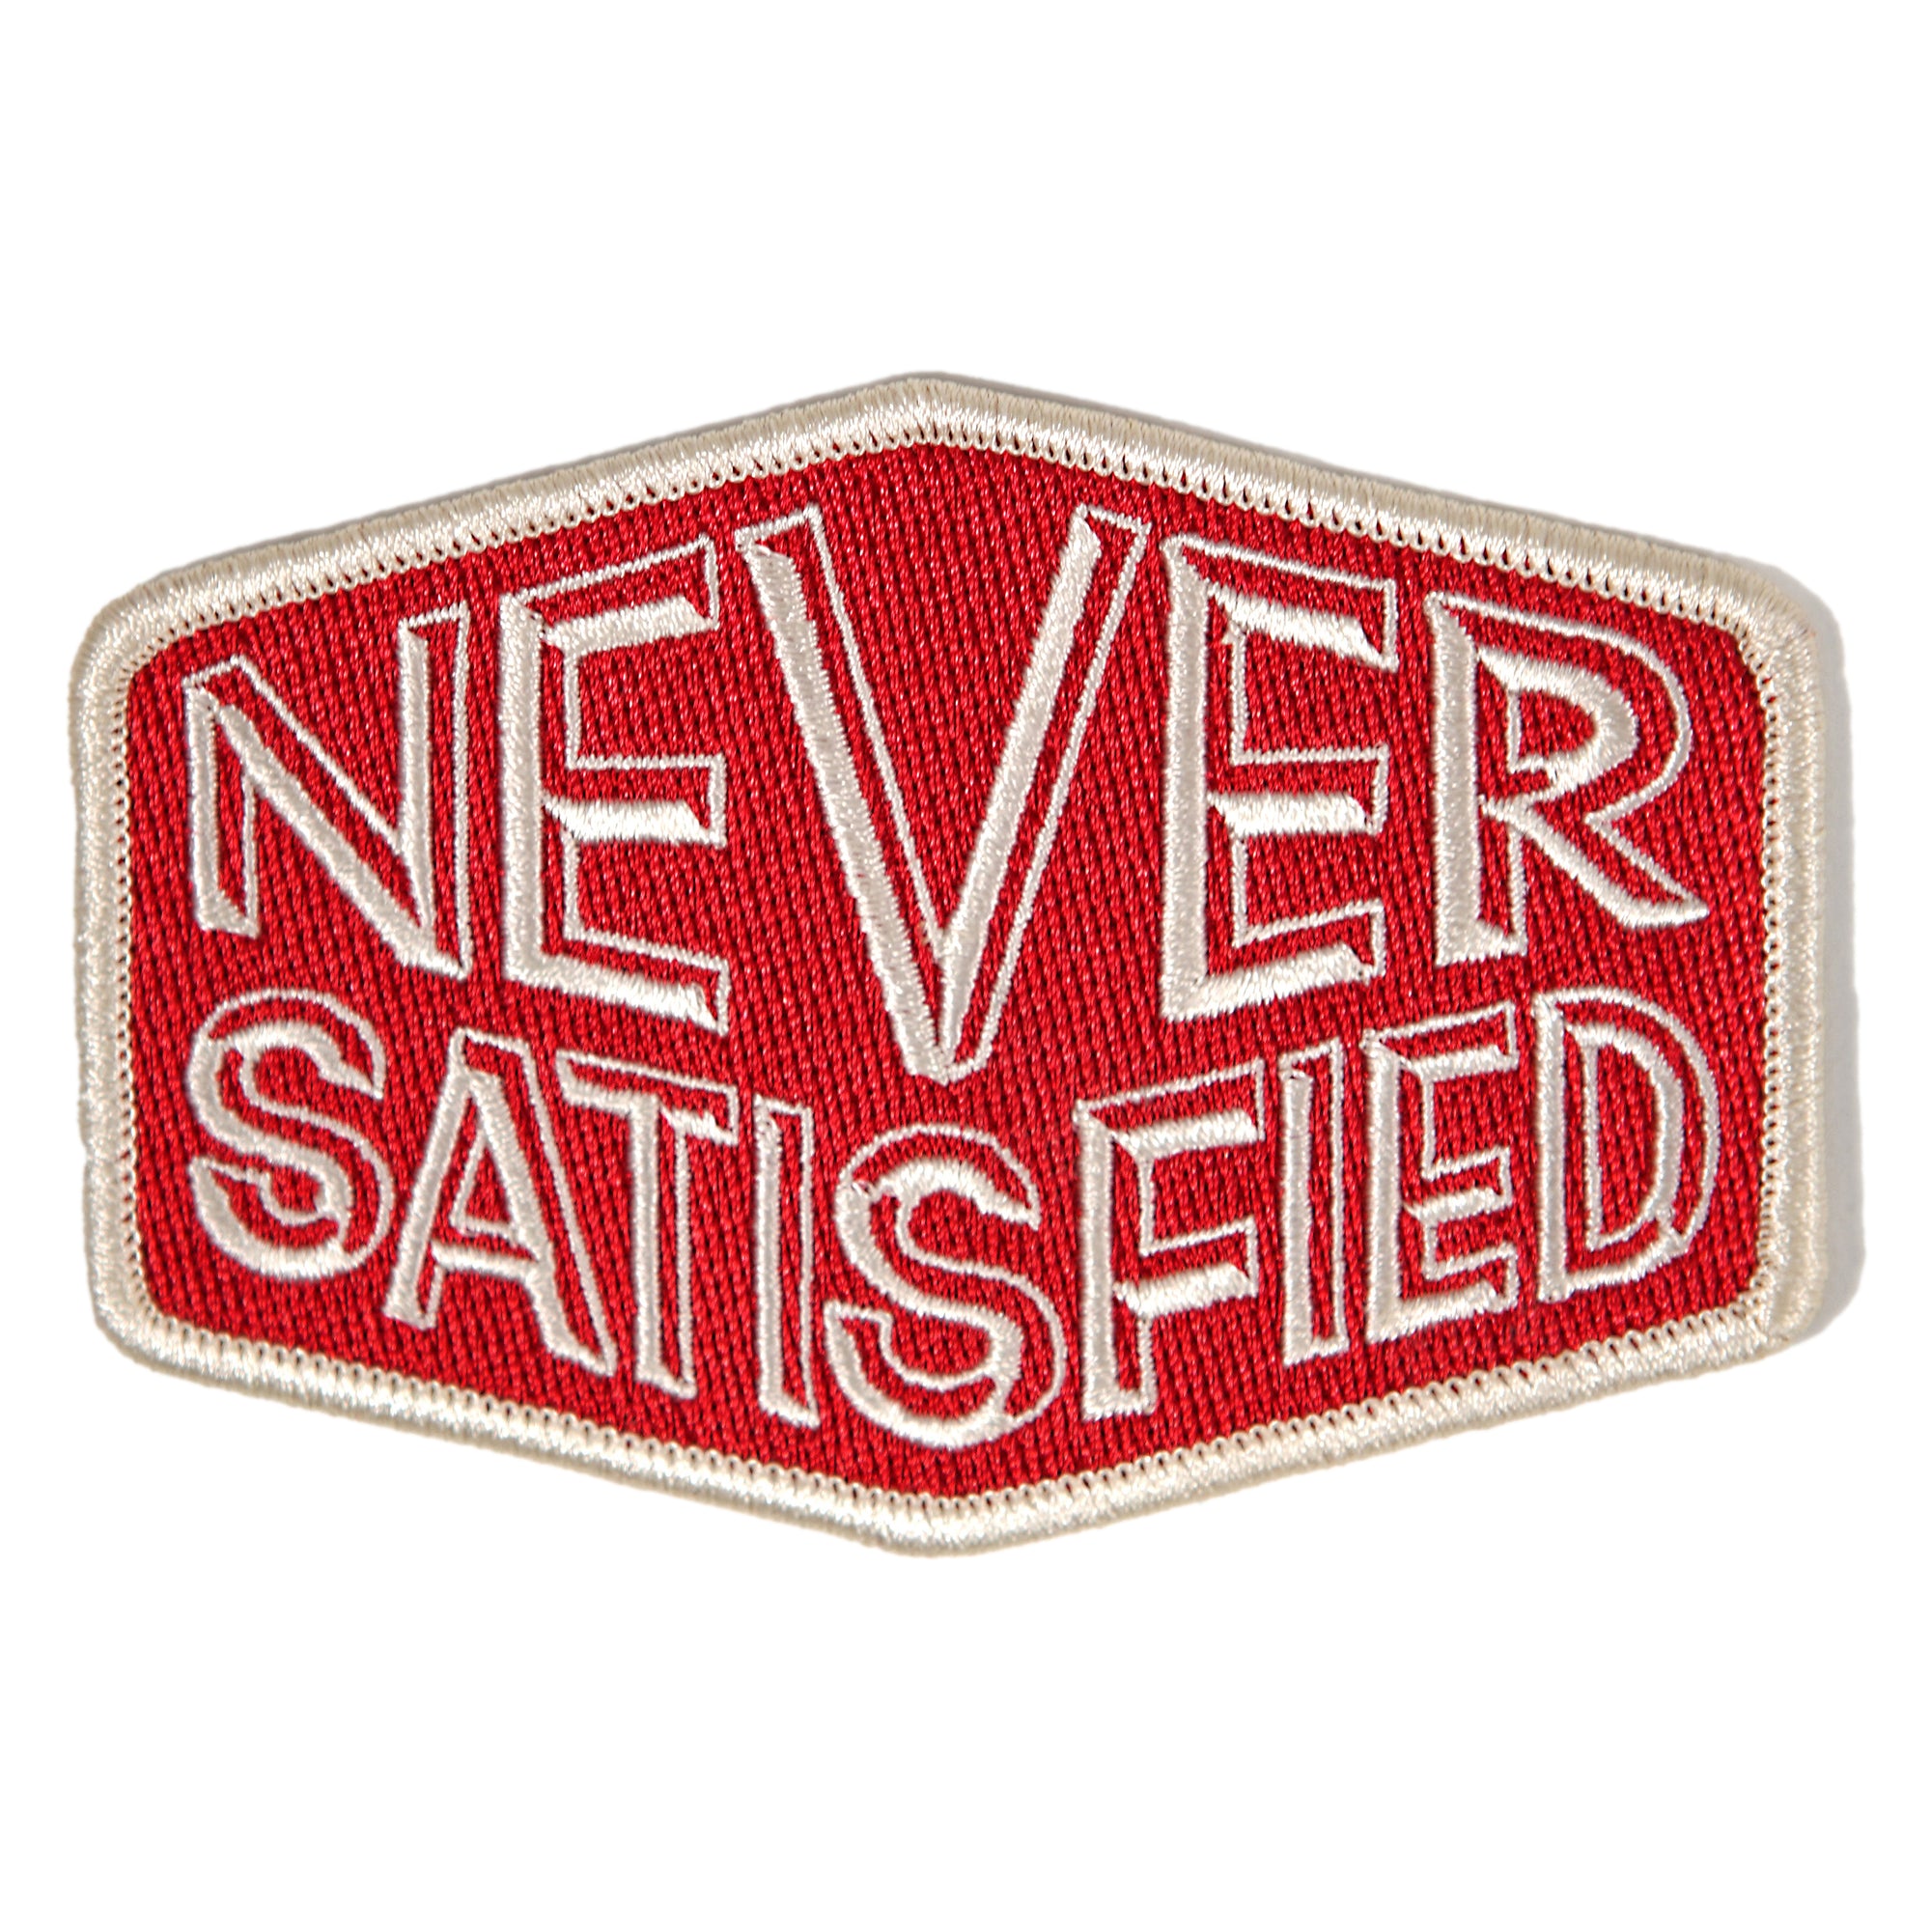 Never Satisfied Patch